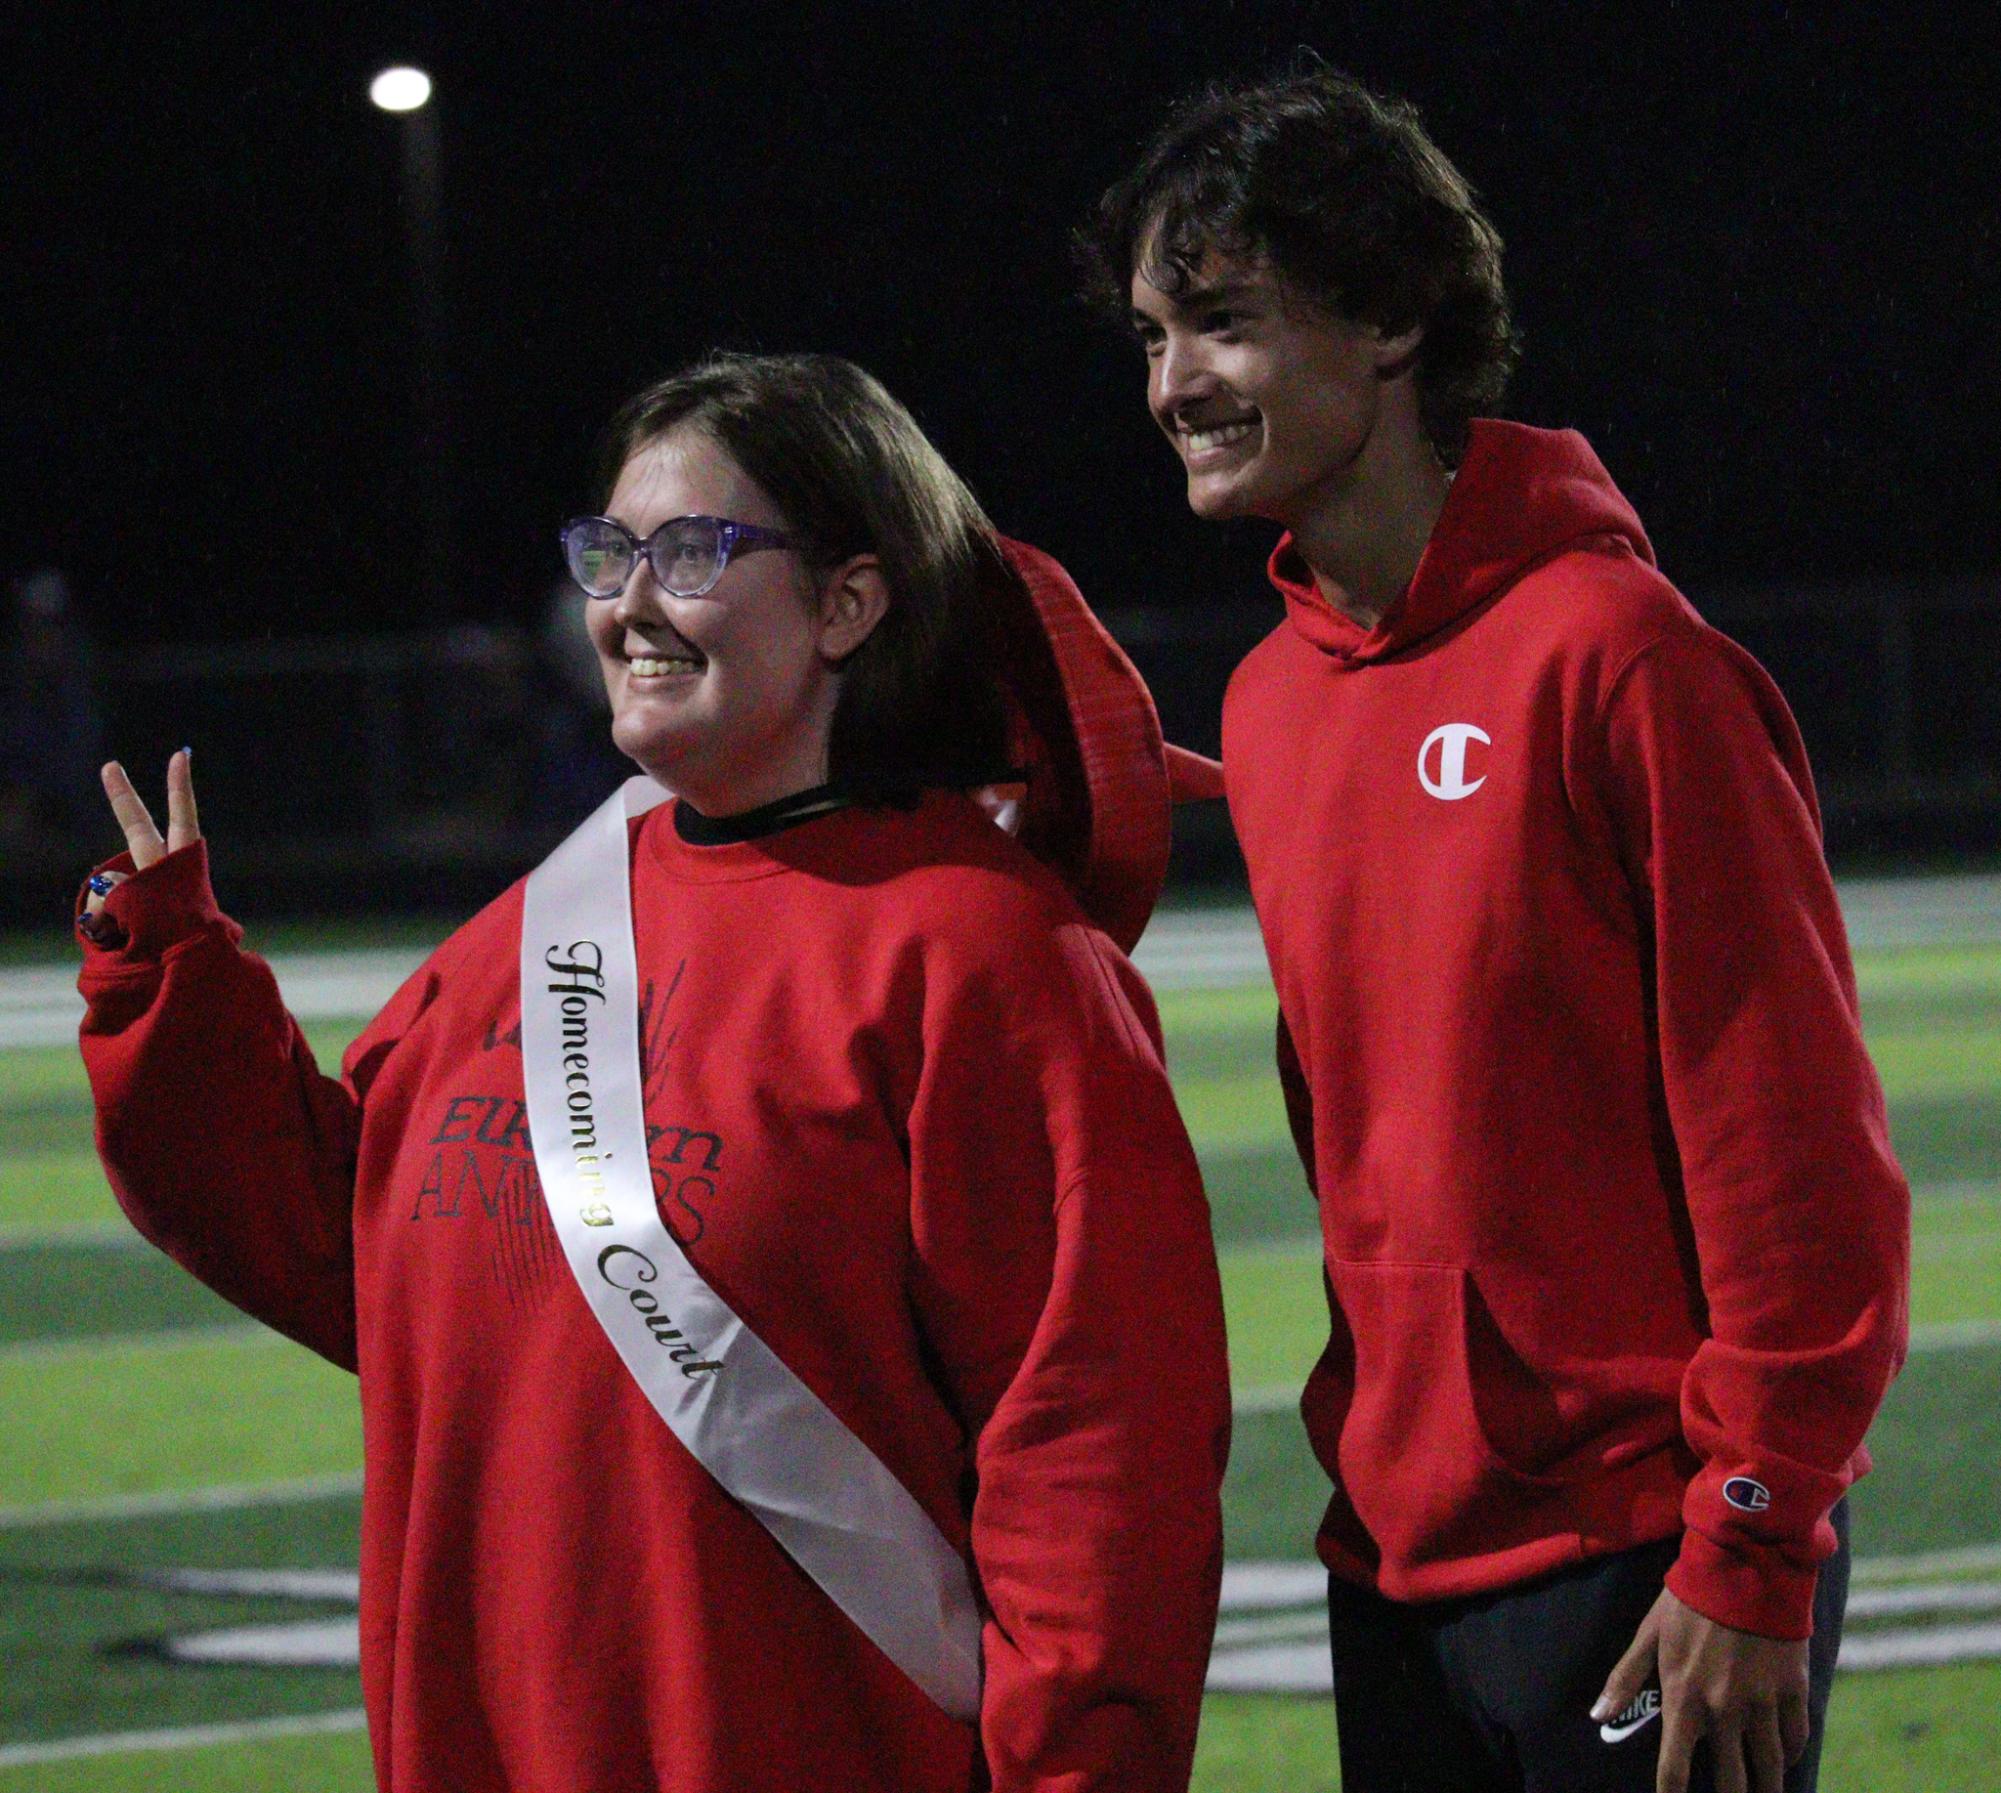 Seniors Lawson Clevenger and Phoebe Zimmerman are honored at Elkhorns football homecoming game.